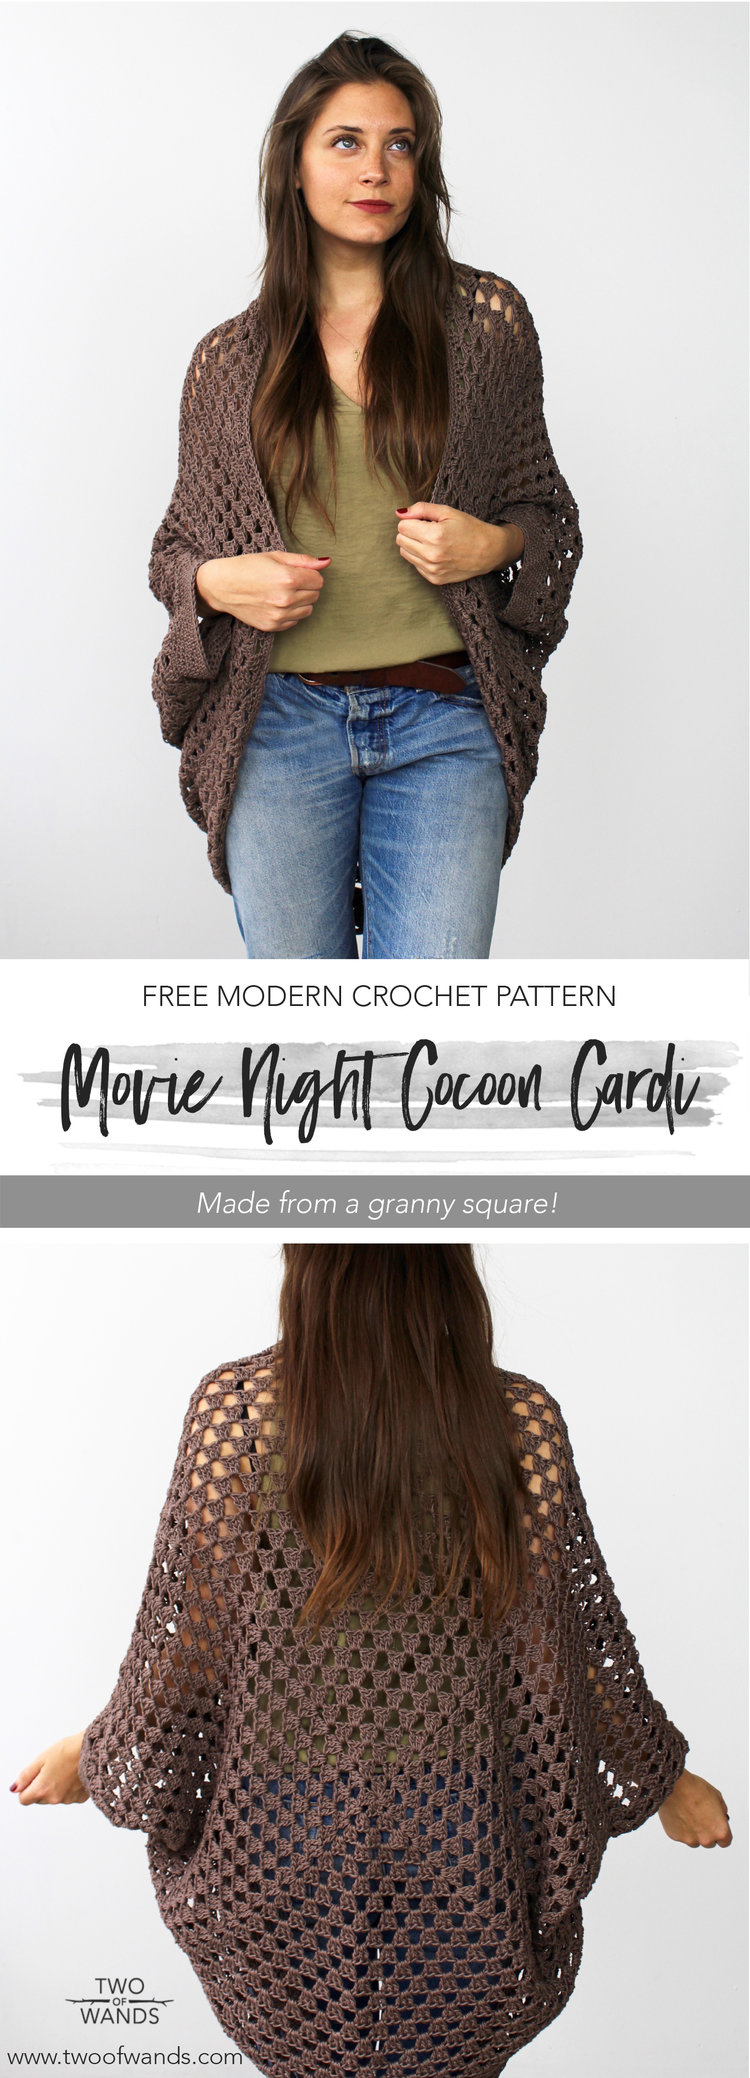 Movie Night Cocoon Cardi Pattern by Two of Wands